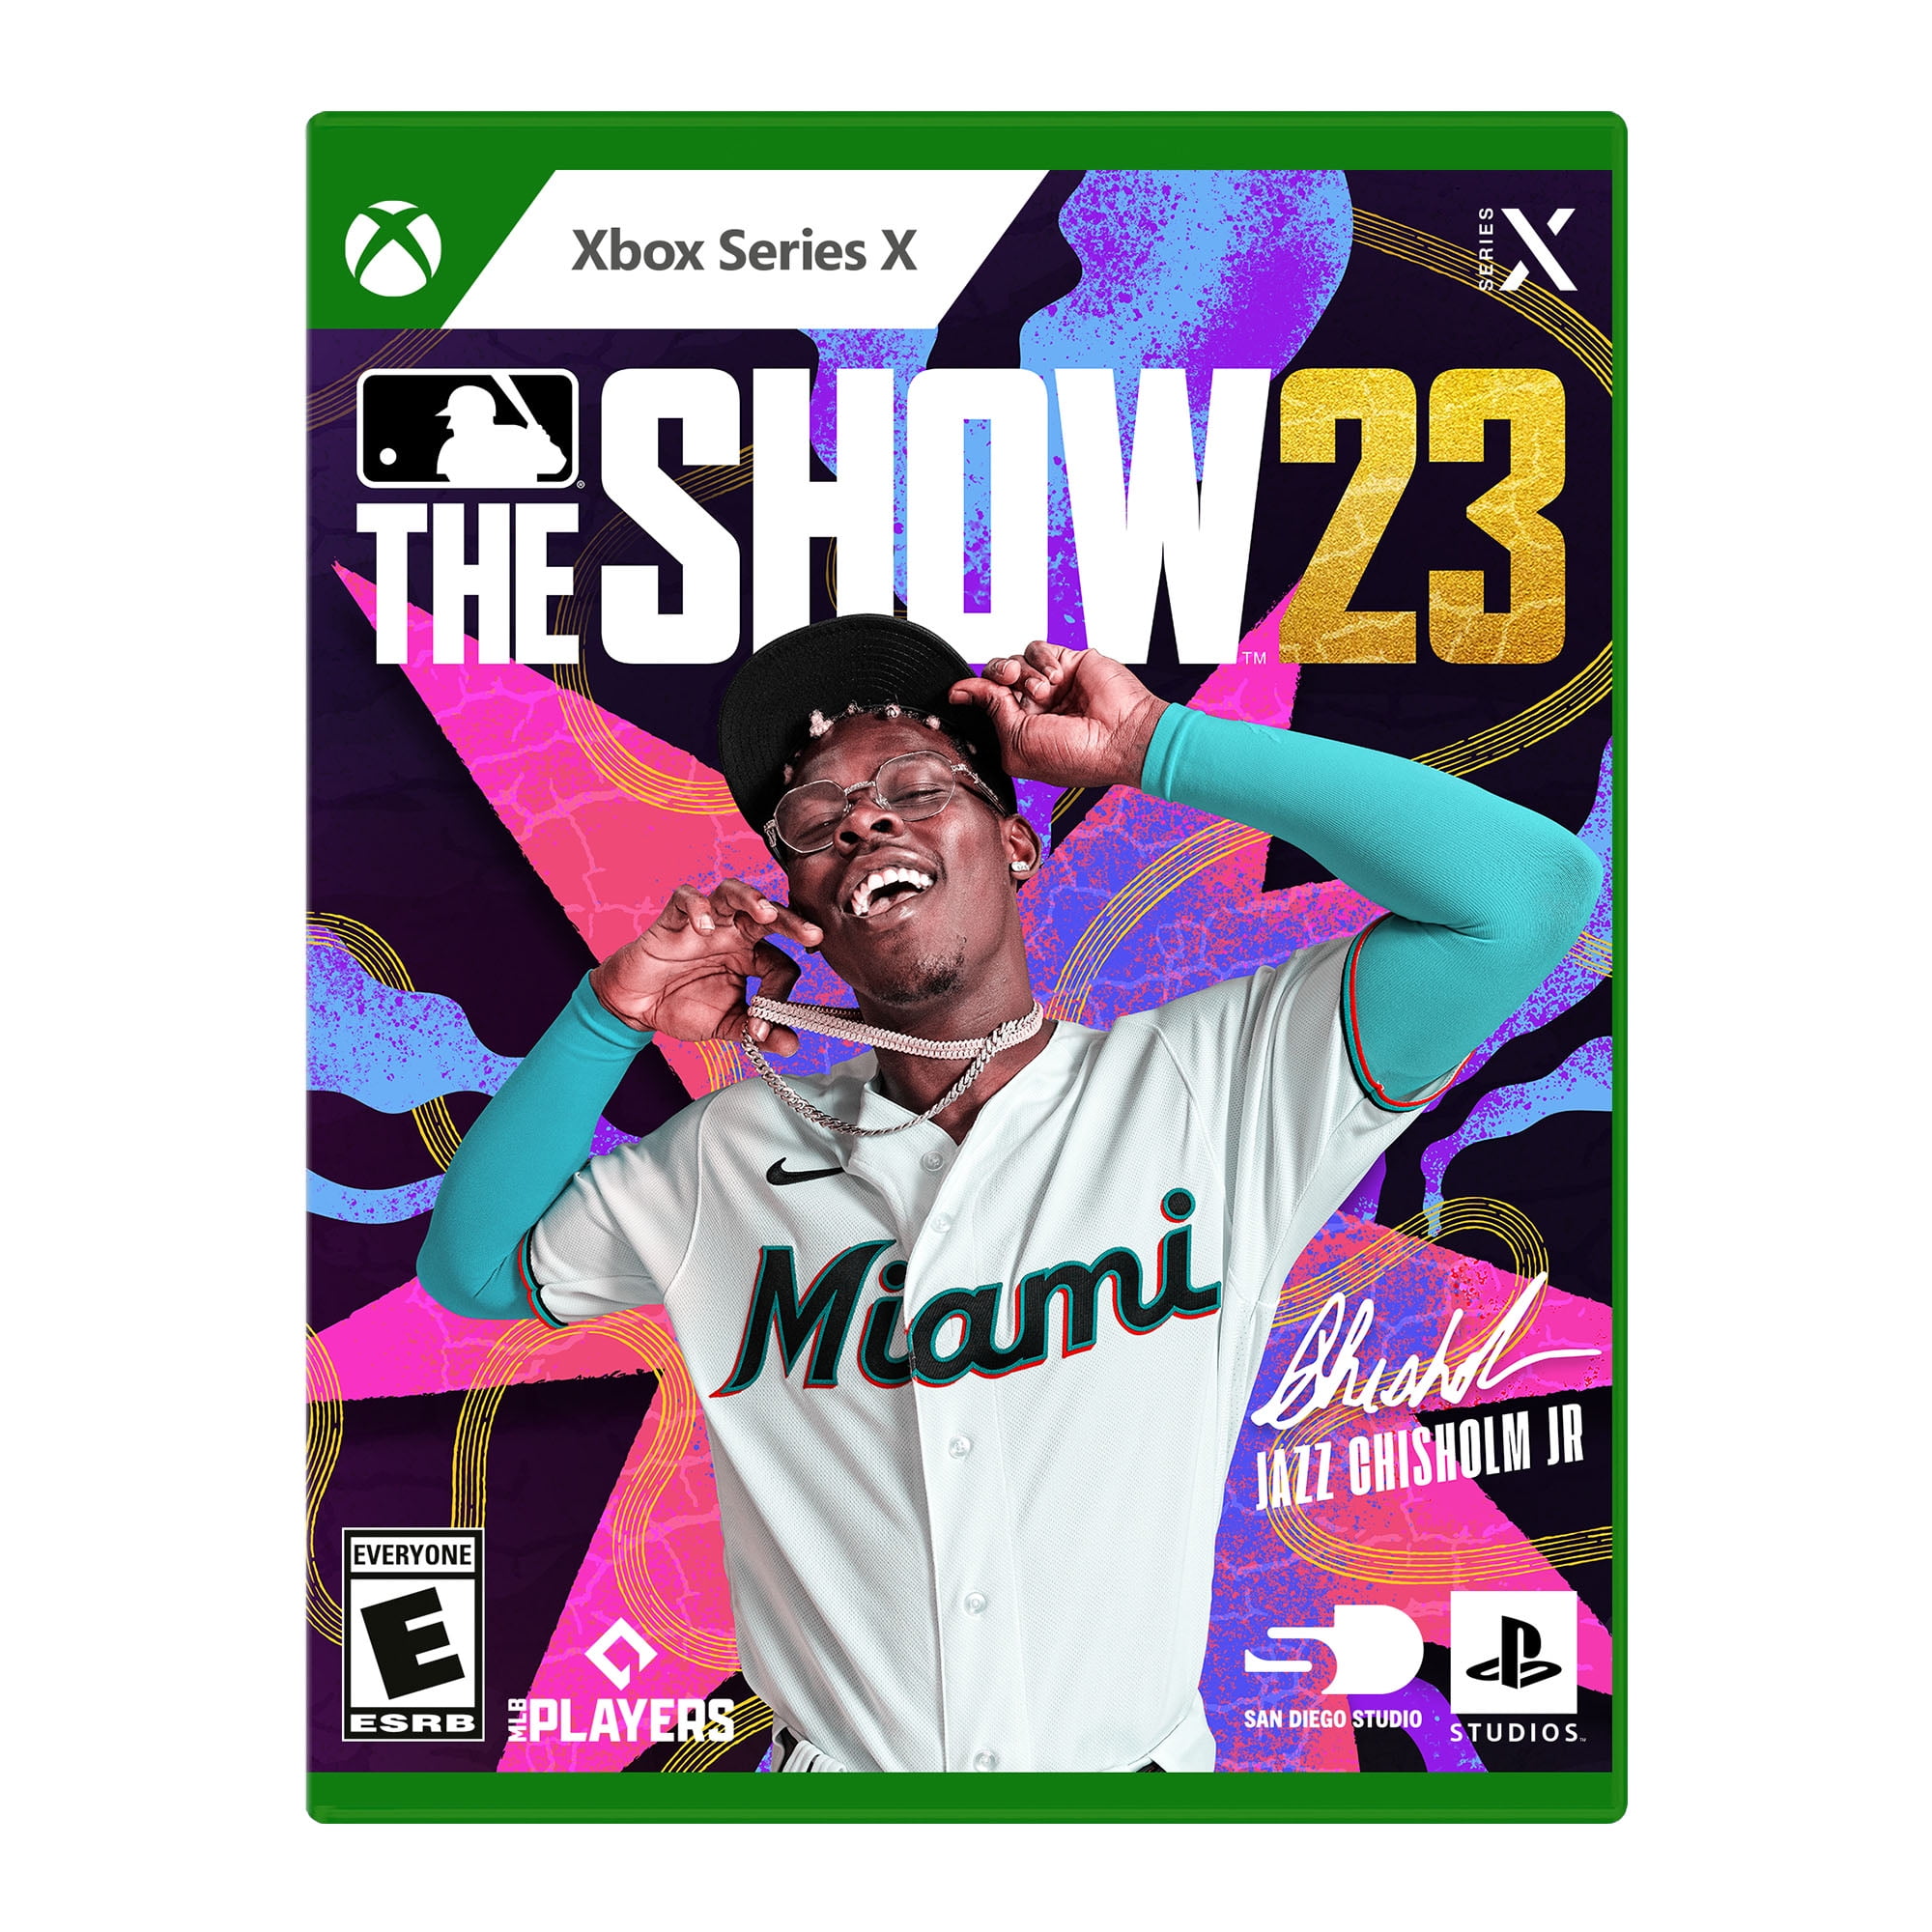 MLB The Show 21 Coming to Xbox Series X